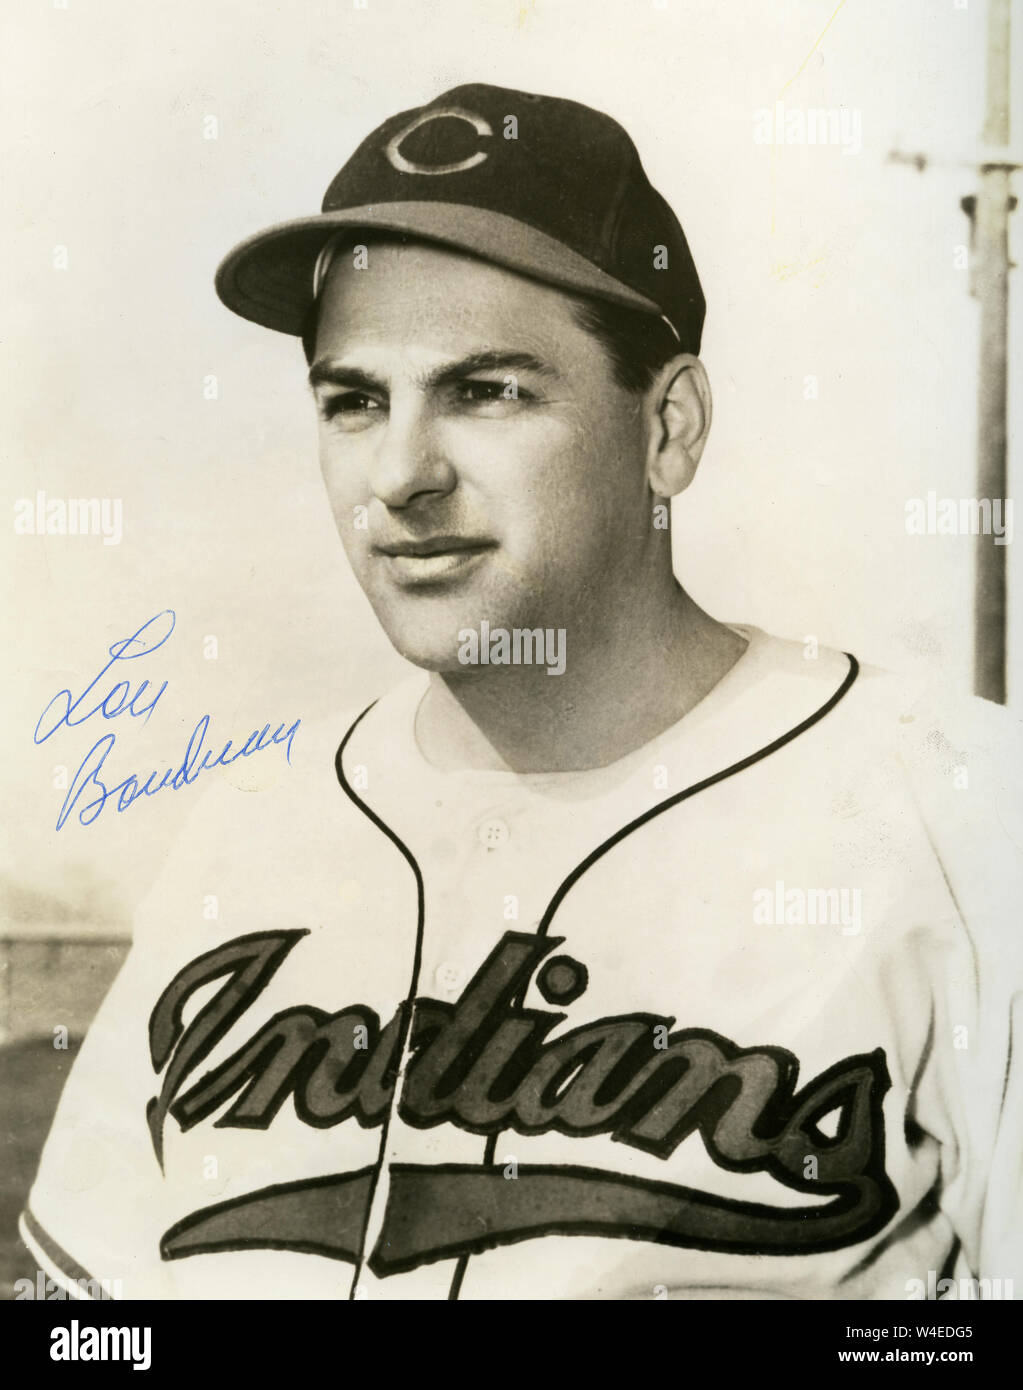 Hall of Fame Baseball player Lou Boudreau mit den Cleveland Indians ca. 1940 s Stockfoto